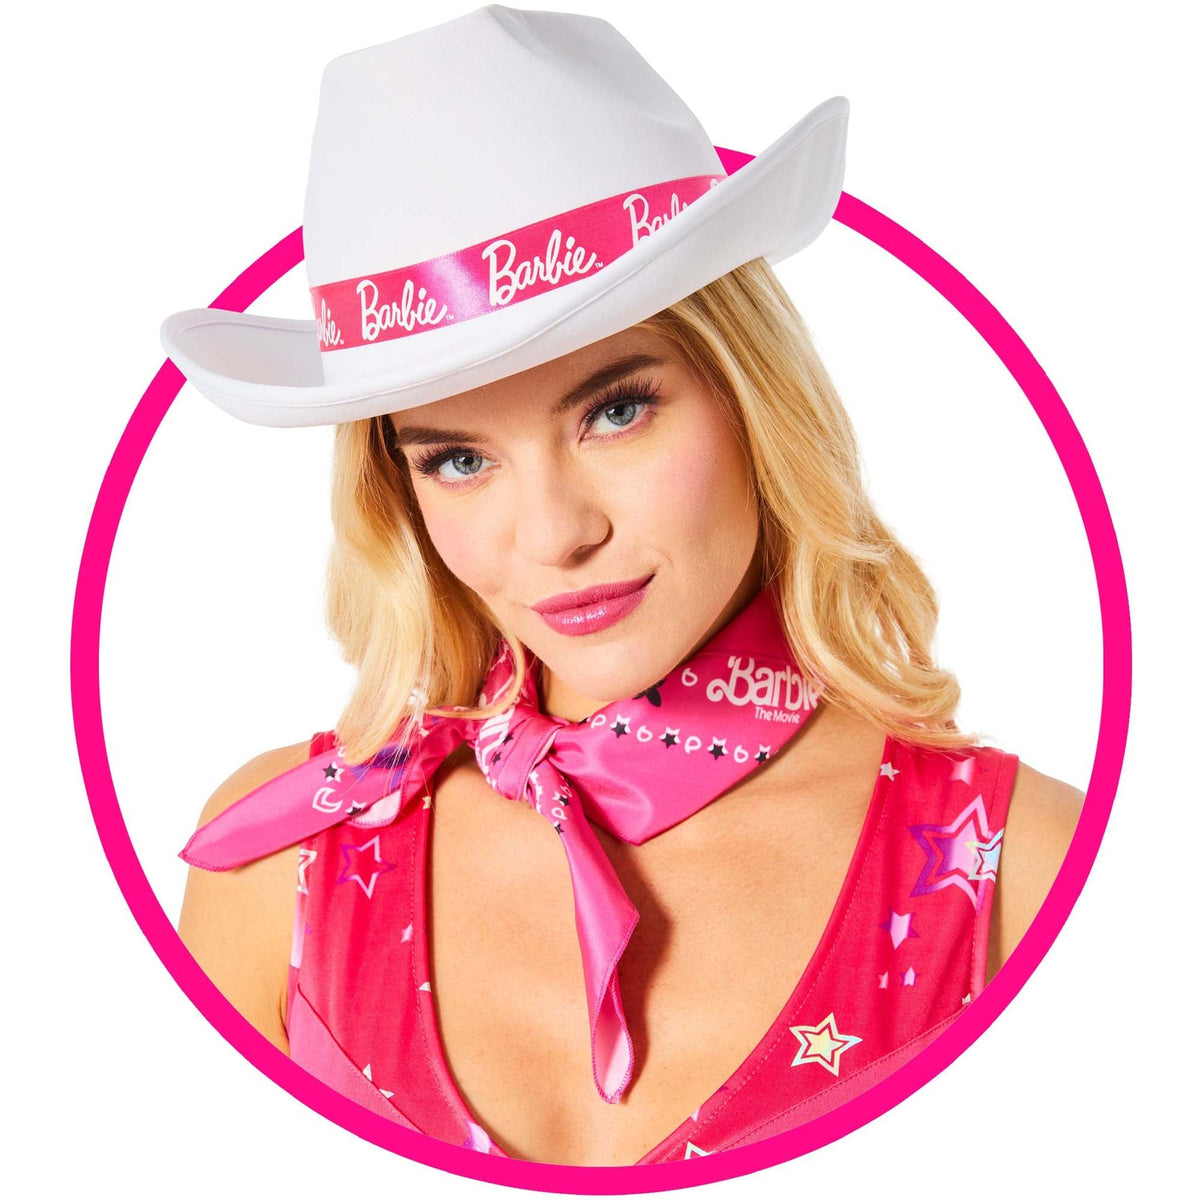 IN SPIRIT DESIGNS Costume Accessories Barbie and Ken White Western Hat for Adults